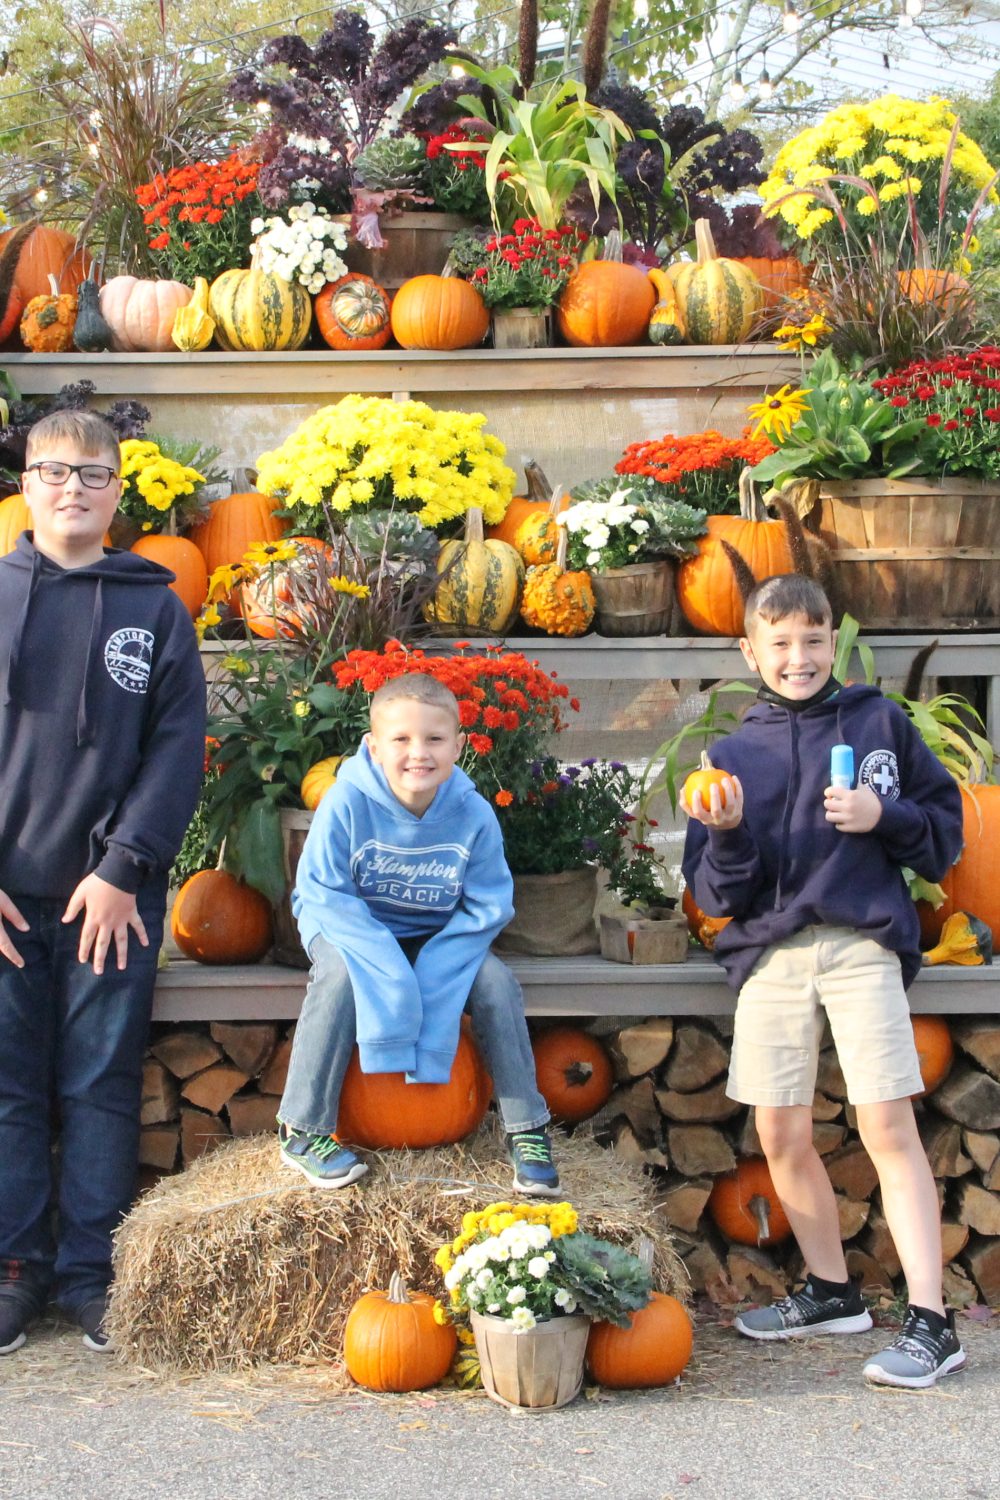 We couldn't resist a fall photo with our boys.  The backdrop is all the fall colors with mums, pumpkins, gourds, etc.